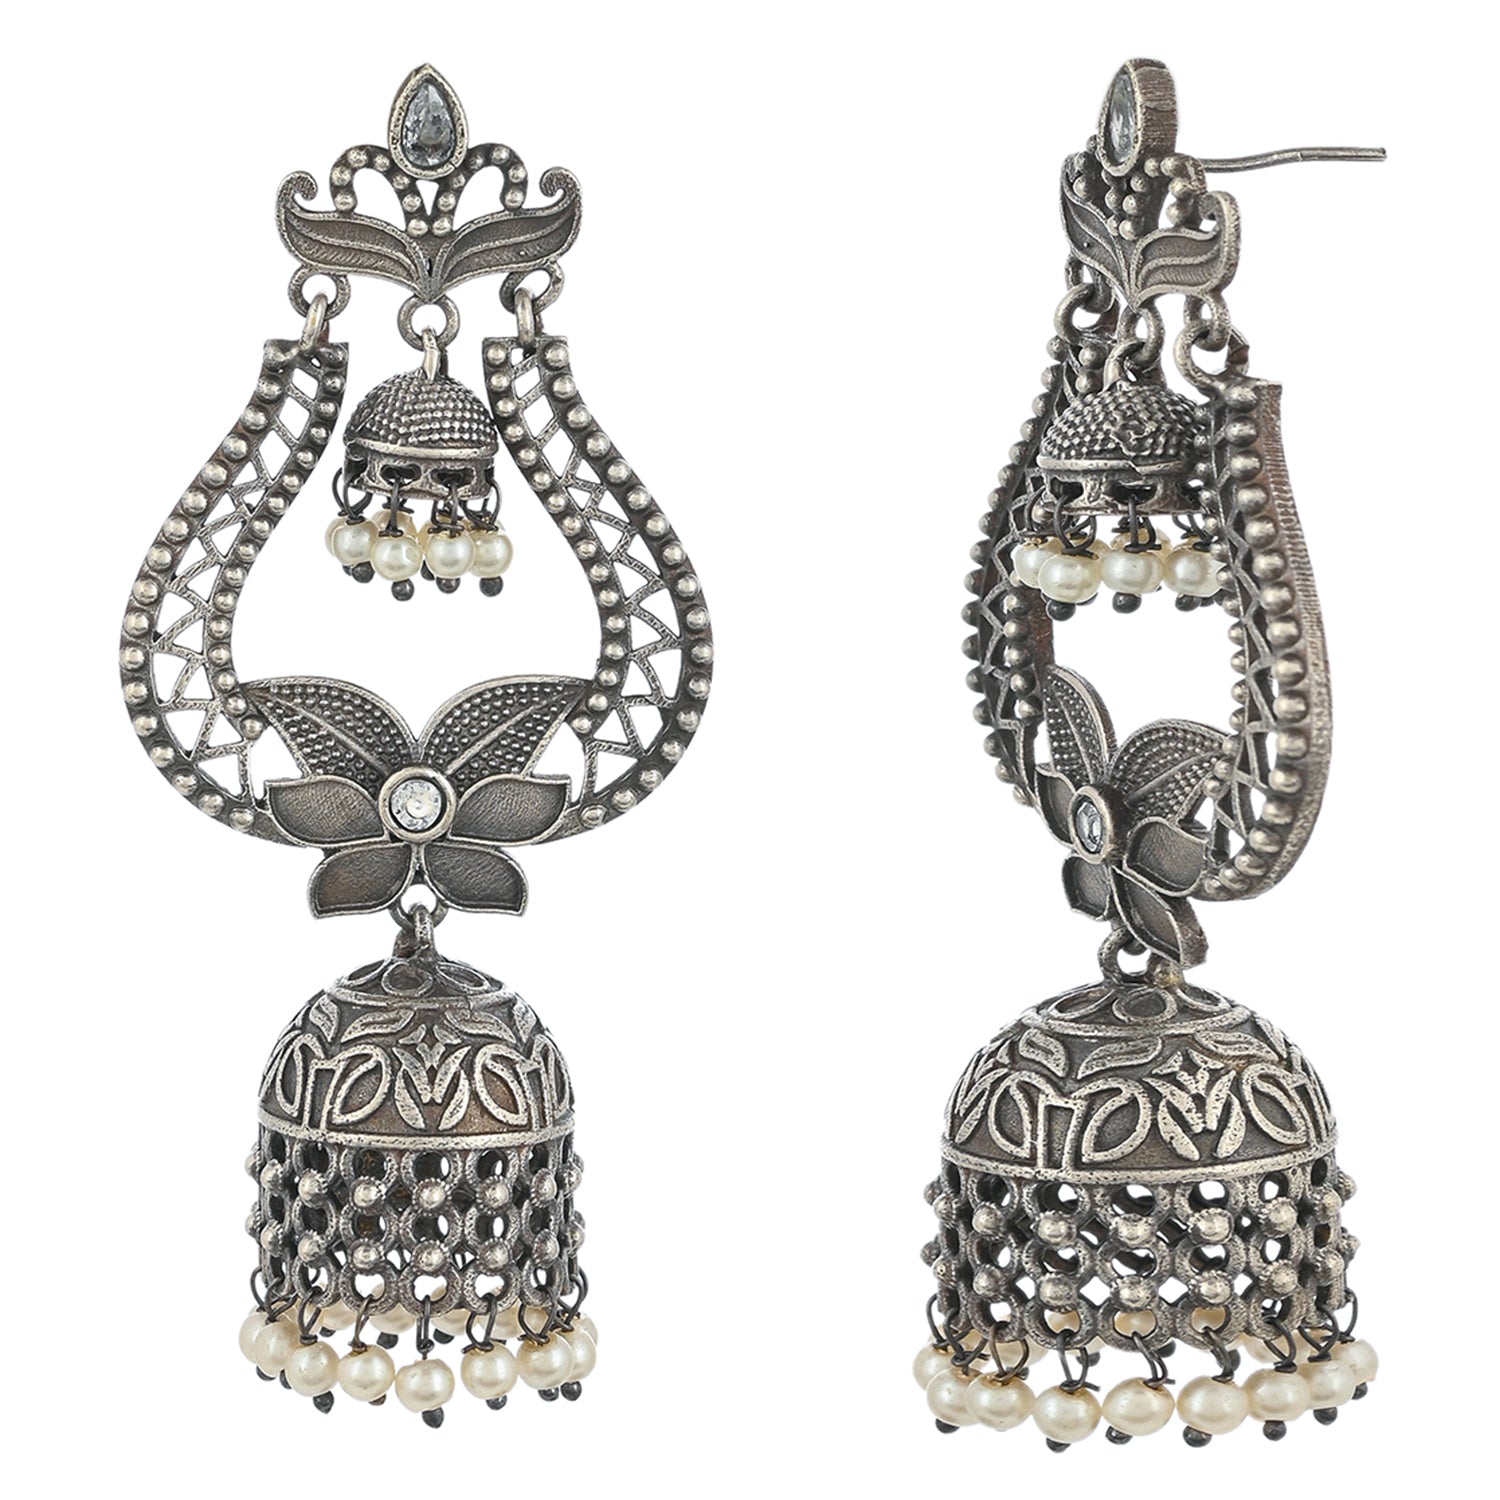 Antique Elegance Filigree Design Faux Pearls Brass Silver Plated Jhumka Earrings